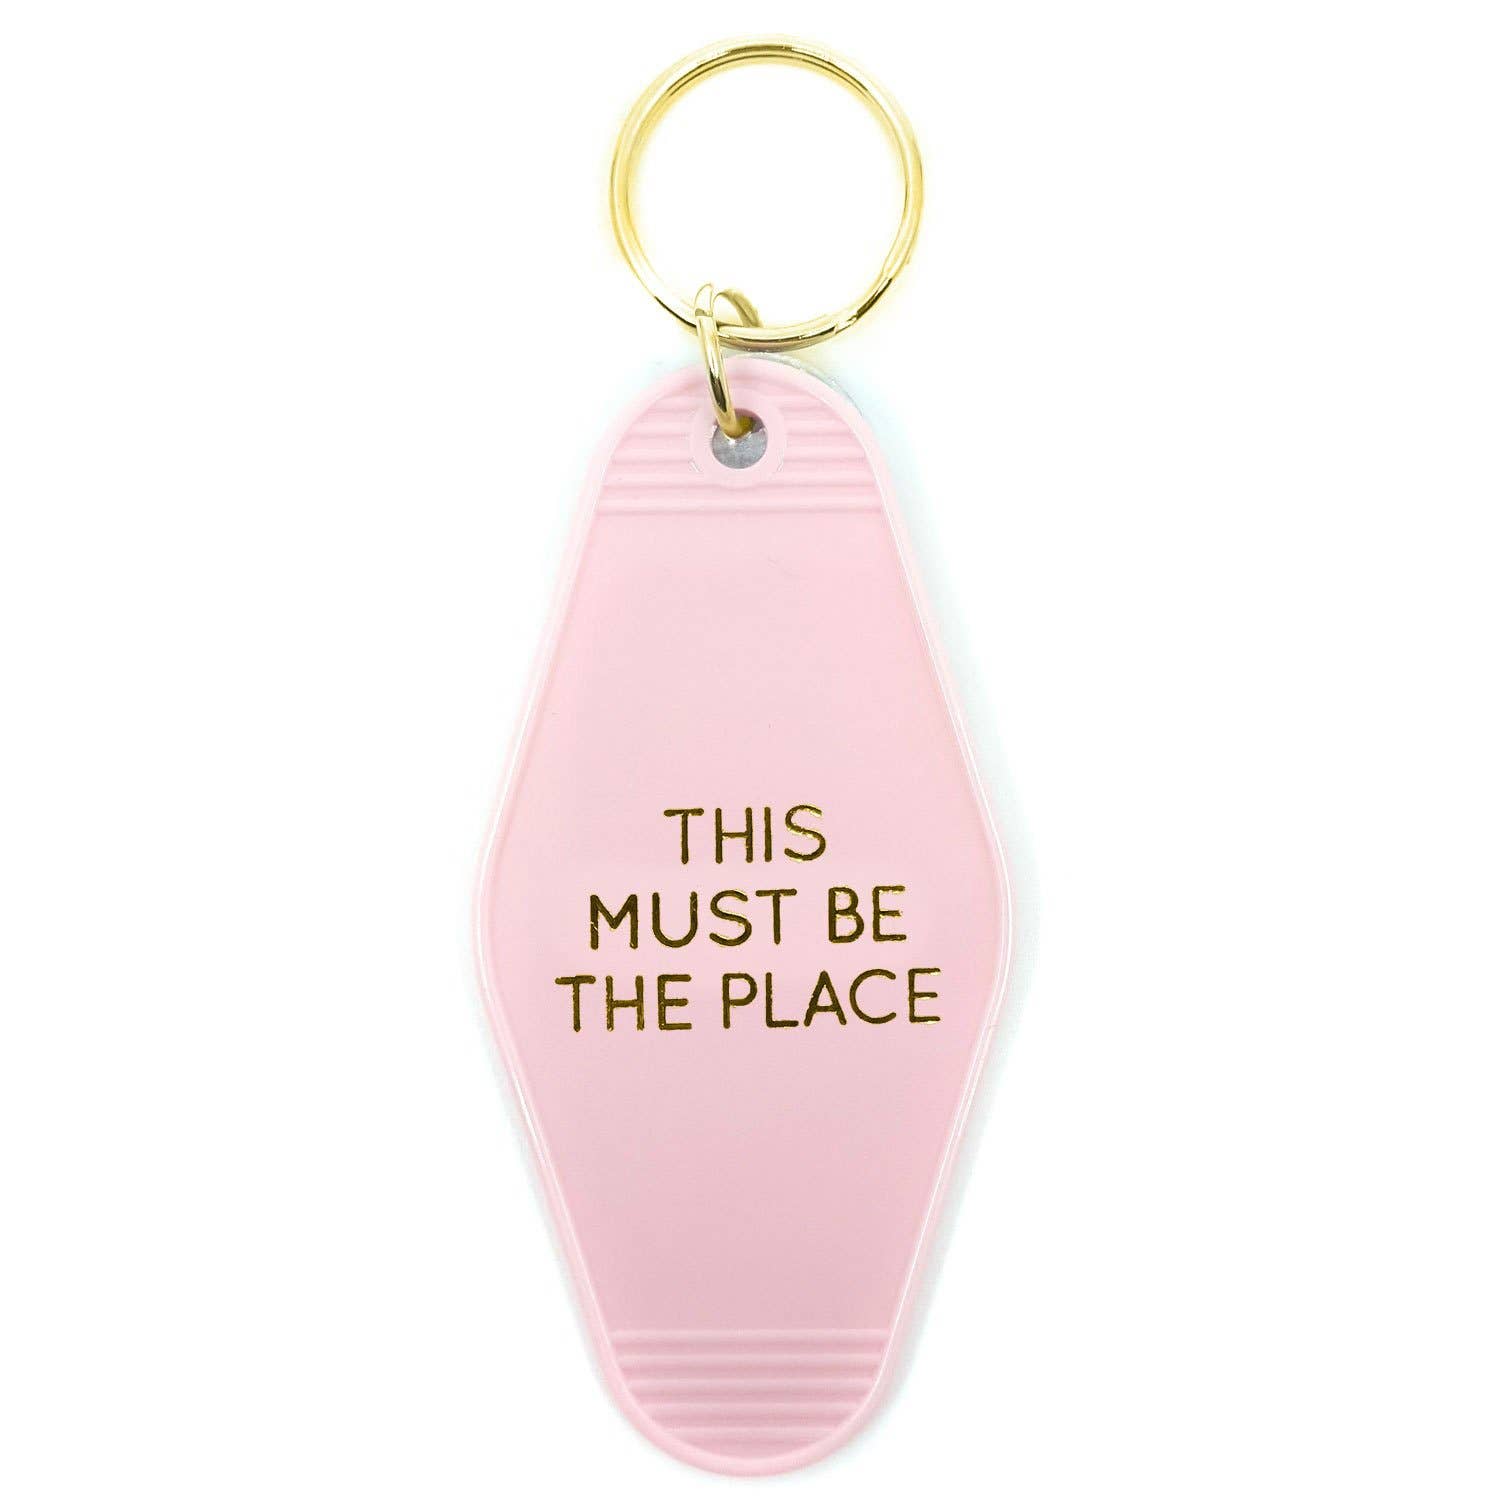 Design Standard Fancy Key Chain at Rs 18 in Surat, Key Ring Clips -  valleyresorts.co.uk